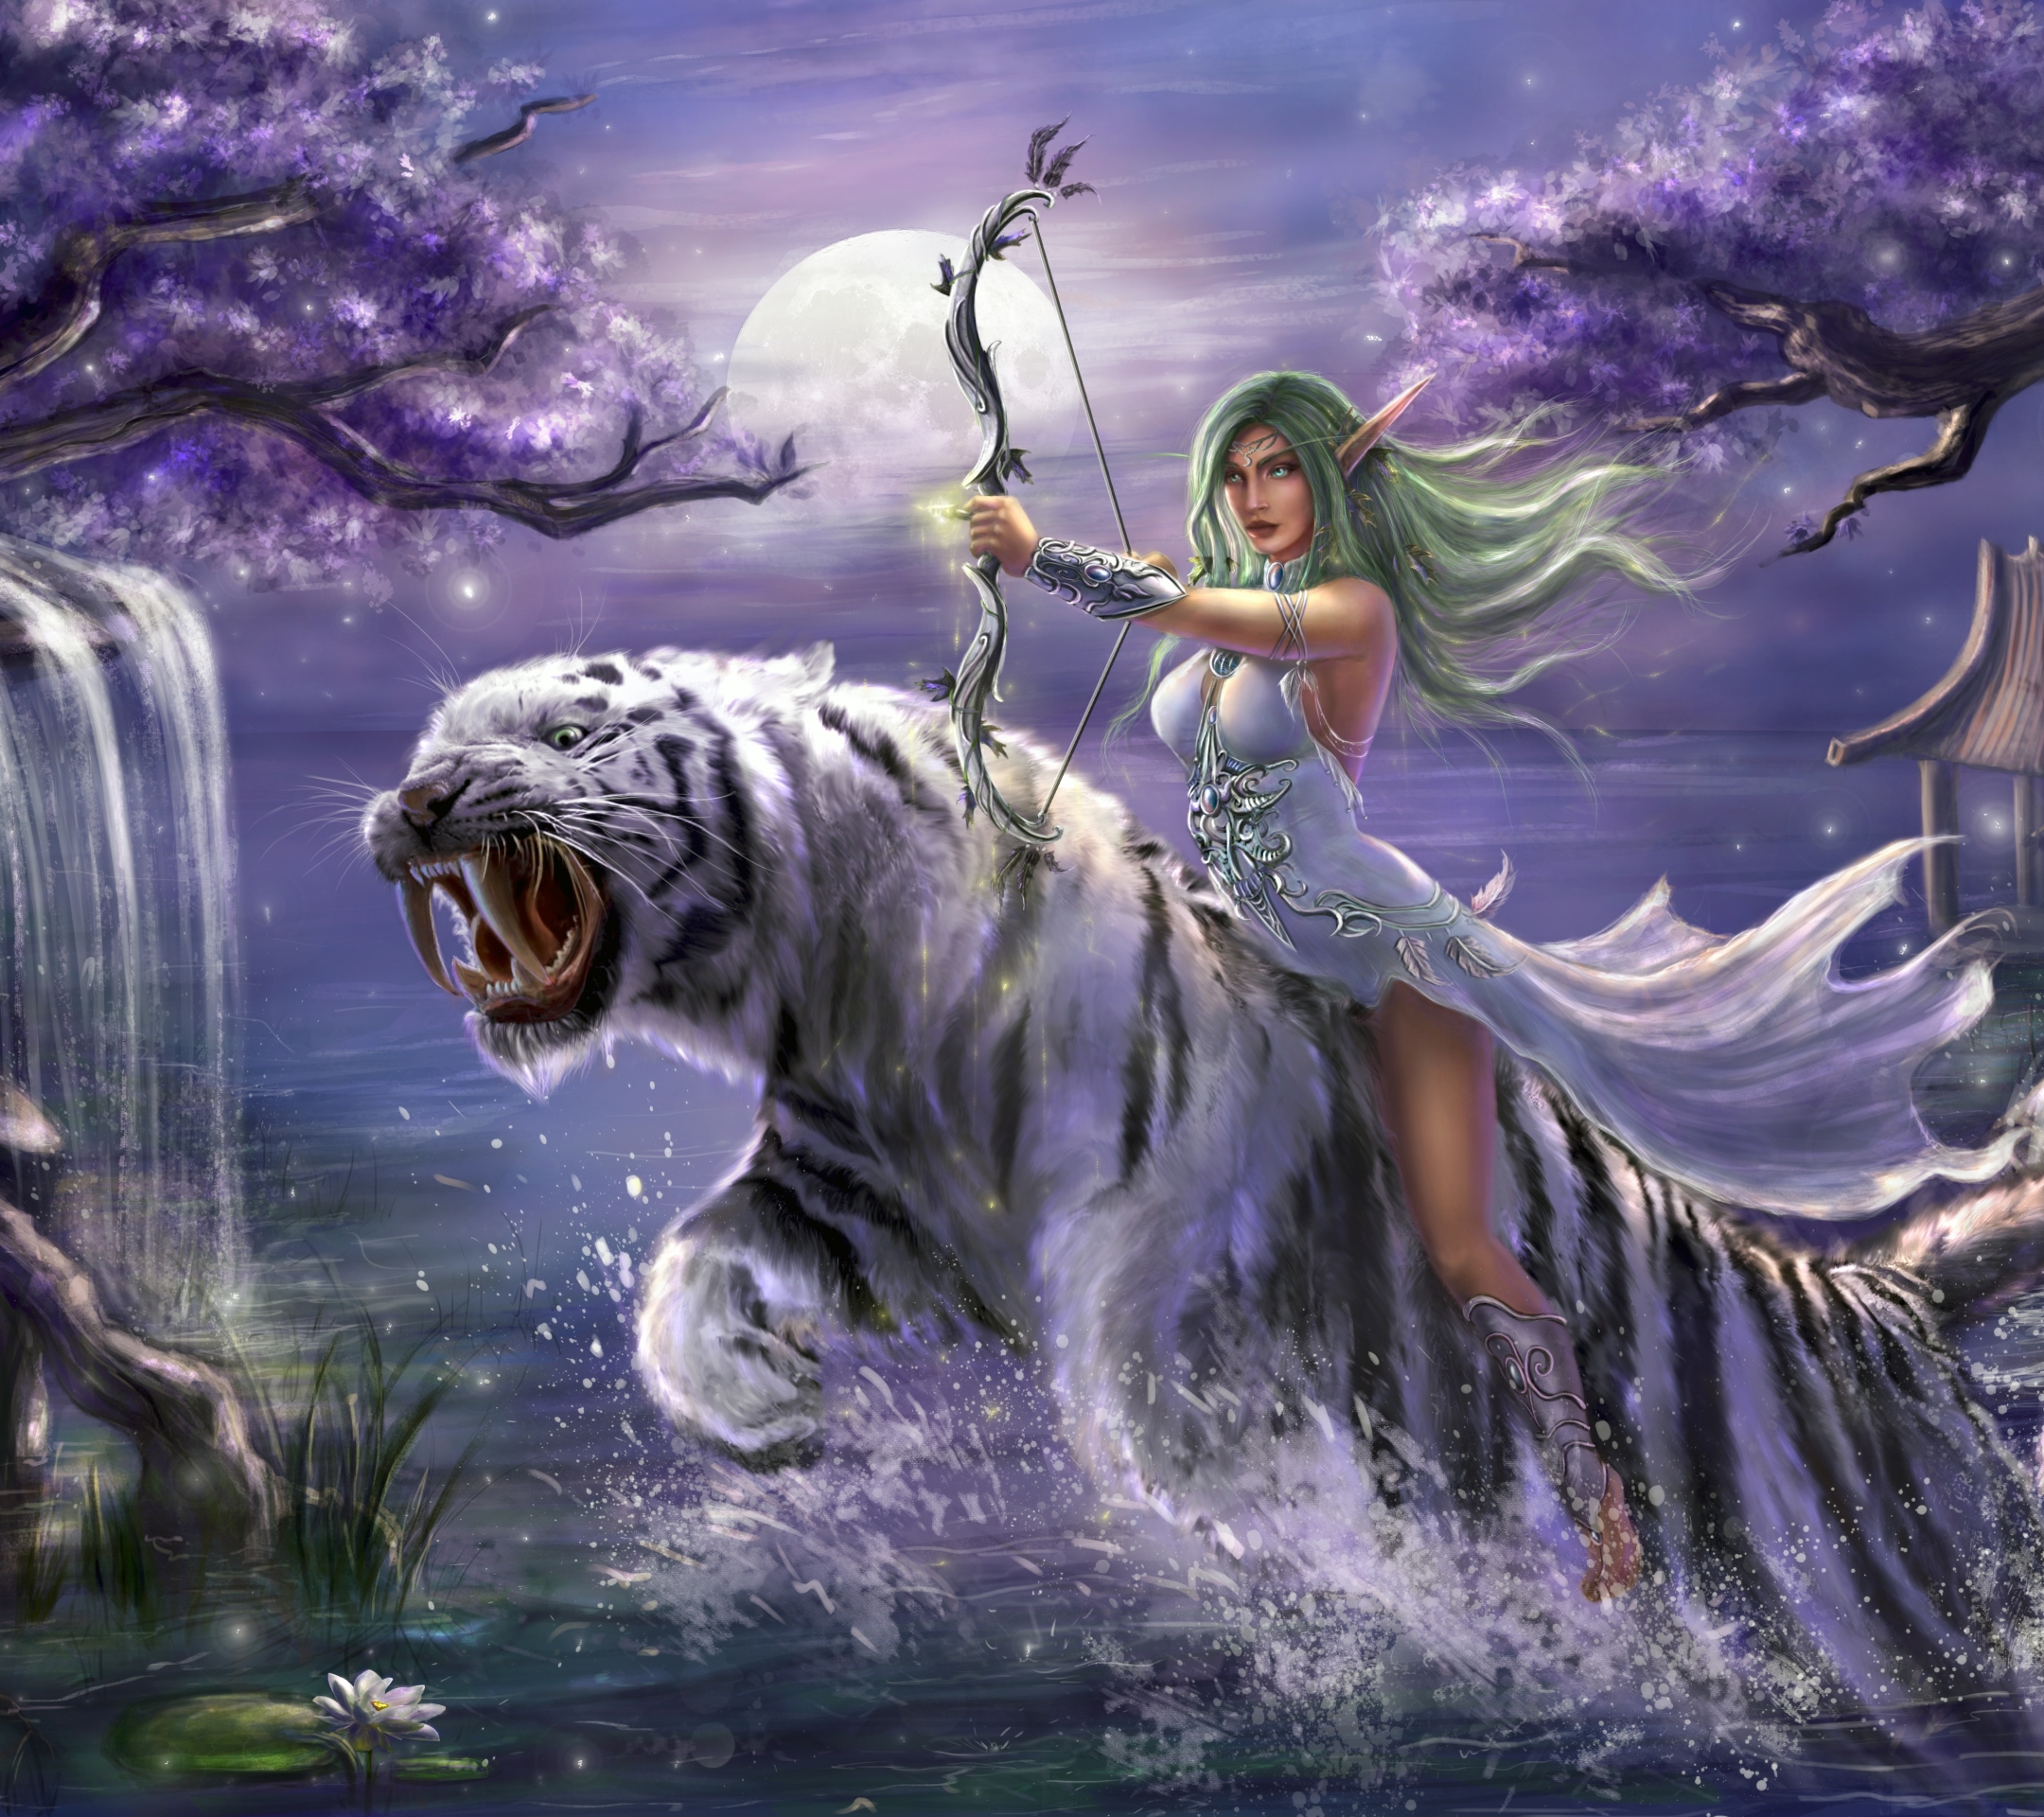 video game, world of warcraft, bow, white tiger, woman warrior, tyrande whisperwind, pointed ears, green hair, blue eyes, tiger, elf, warcraft